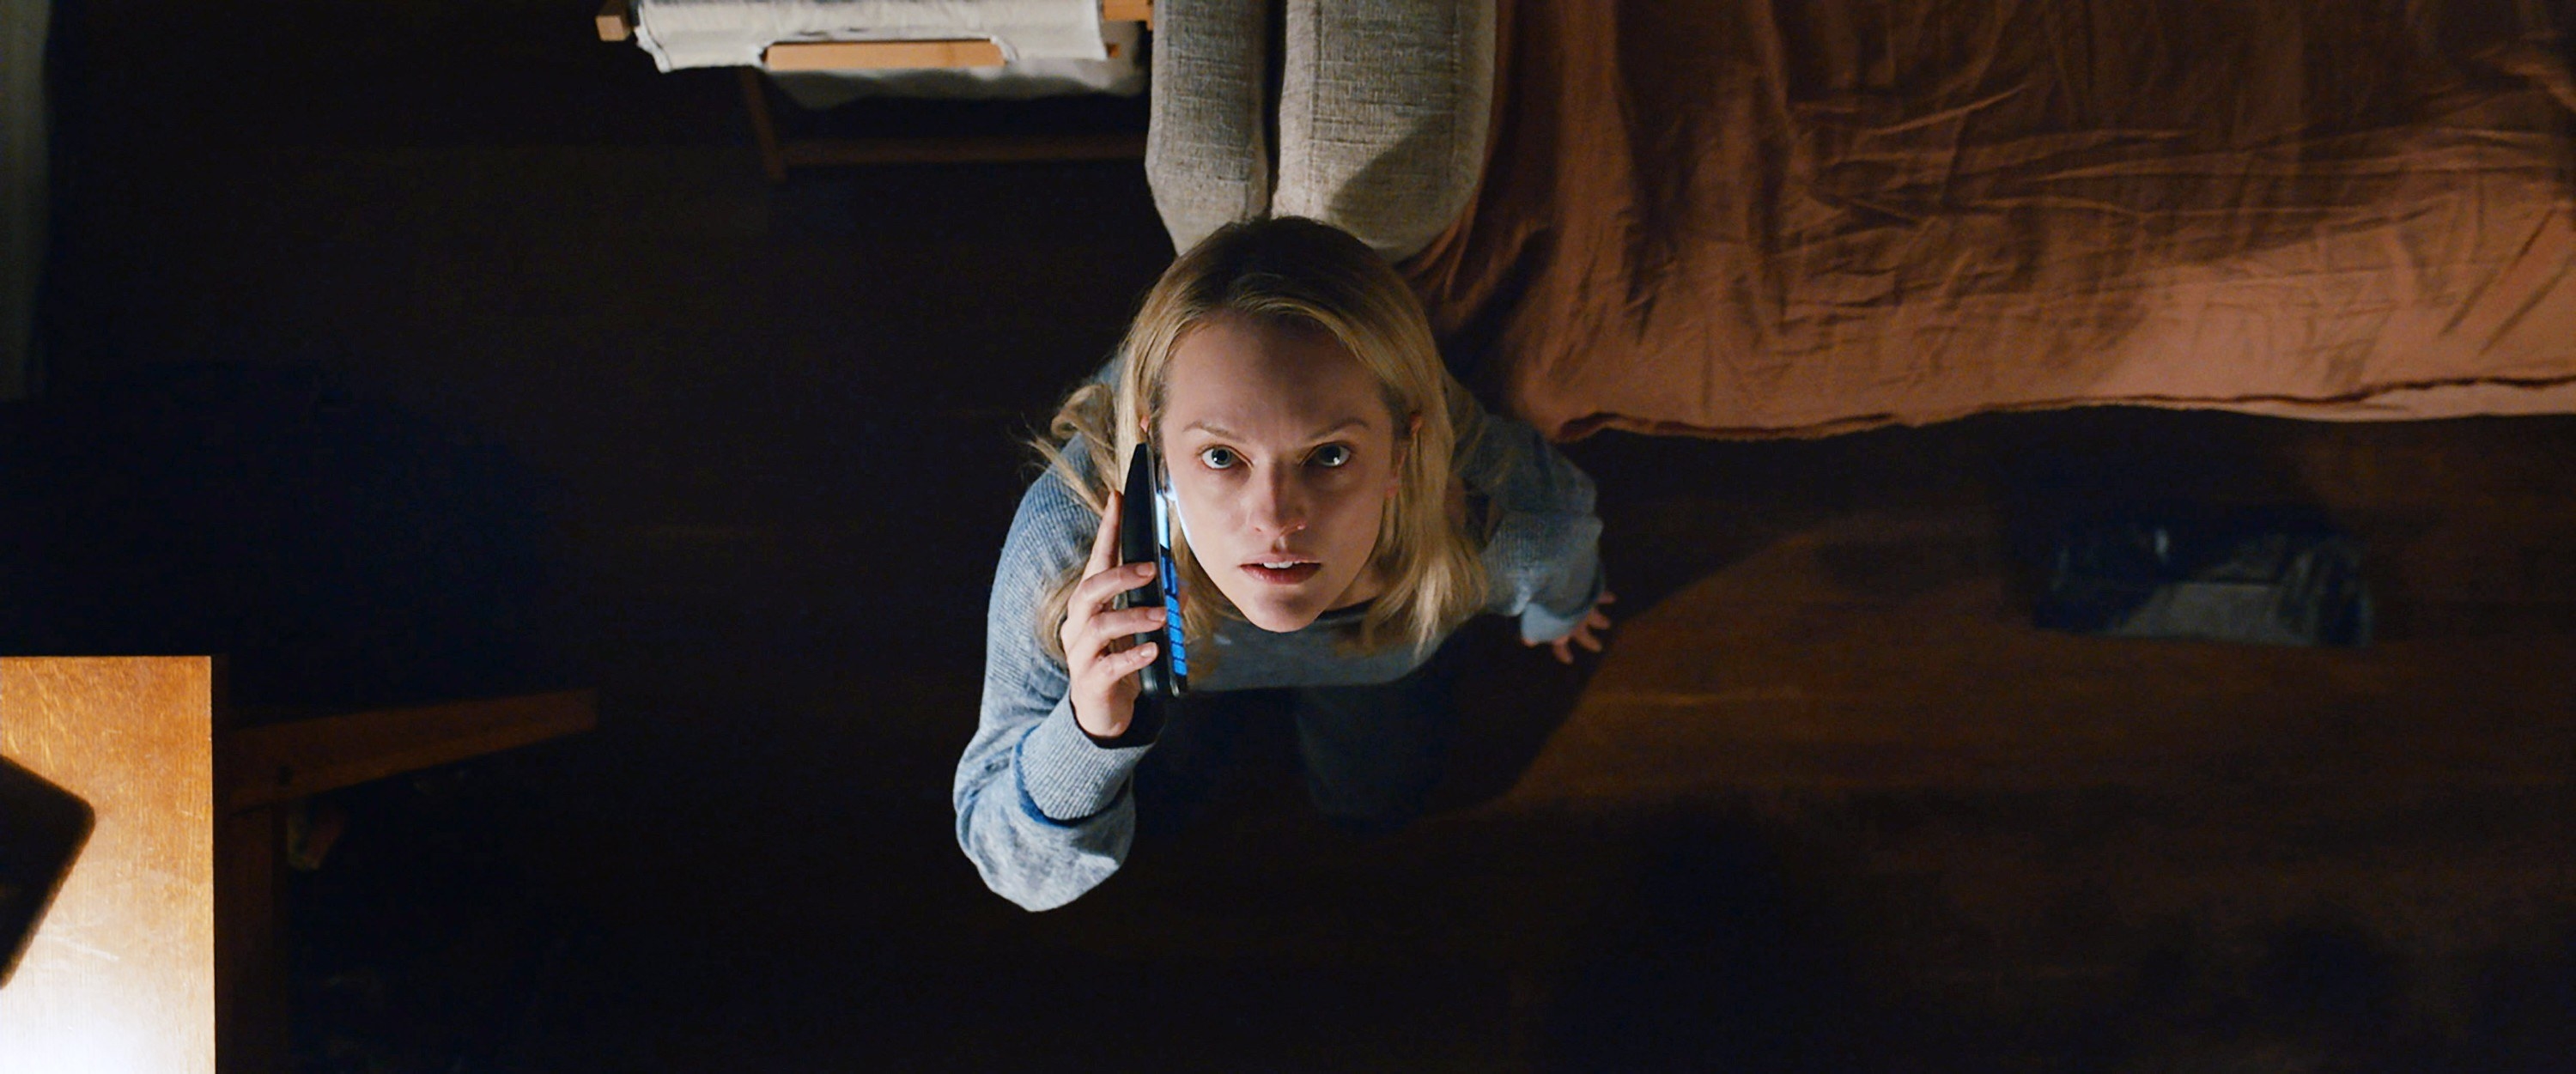 Elizabeth Moss looks up at the ceiling while on the phone